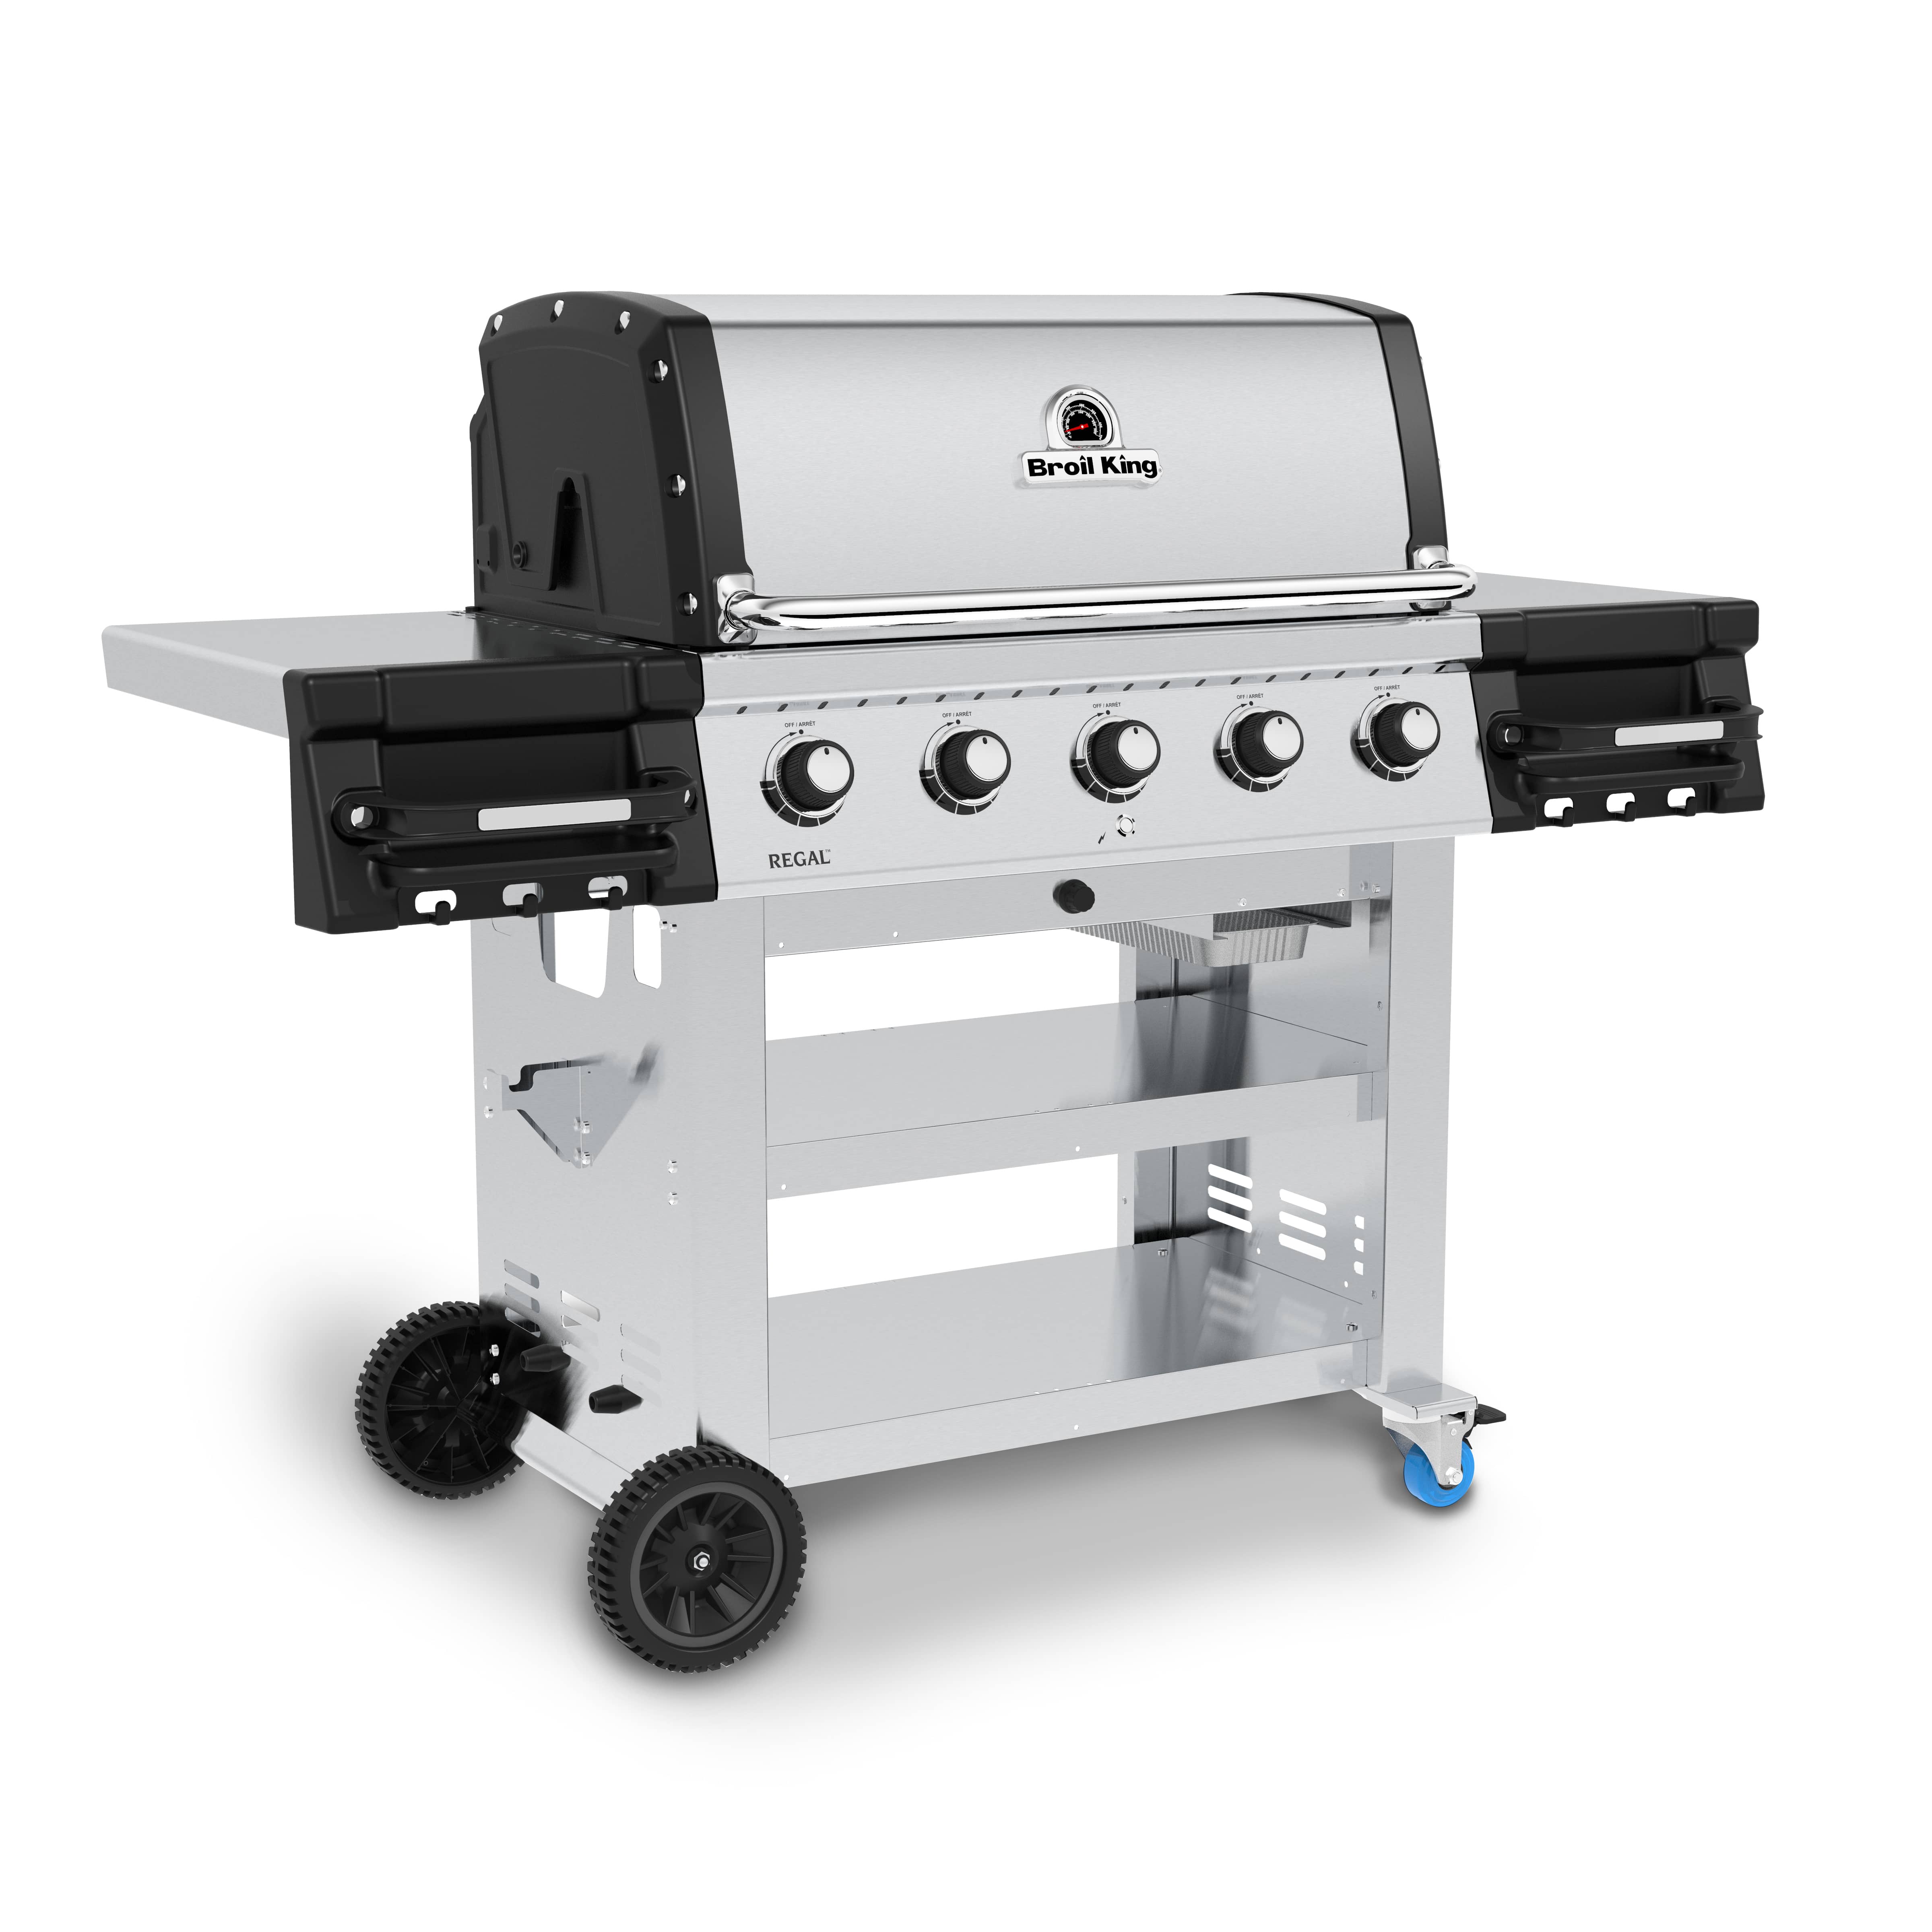 Broil King® REGAL™ S520 Golfcourse